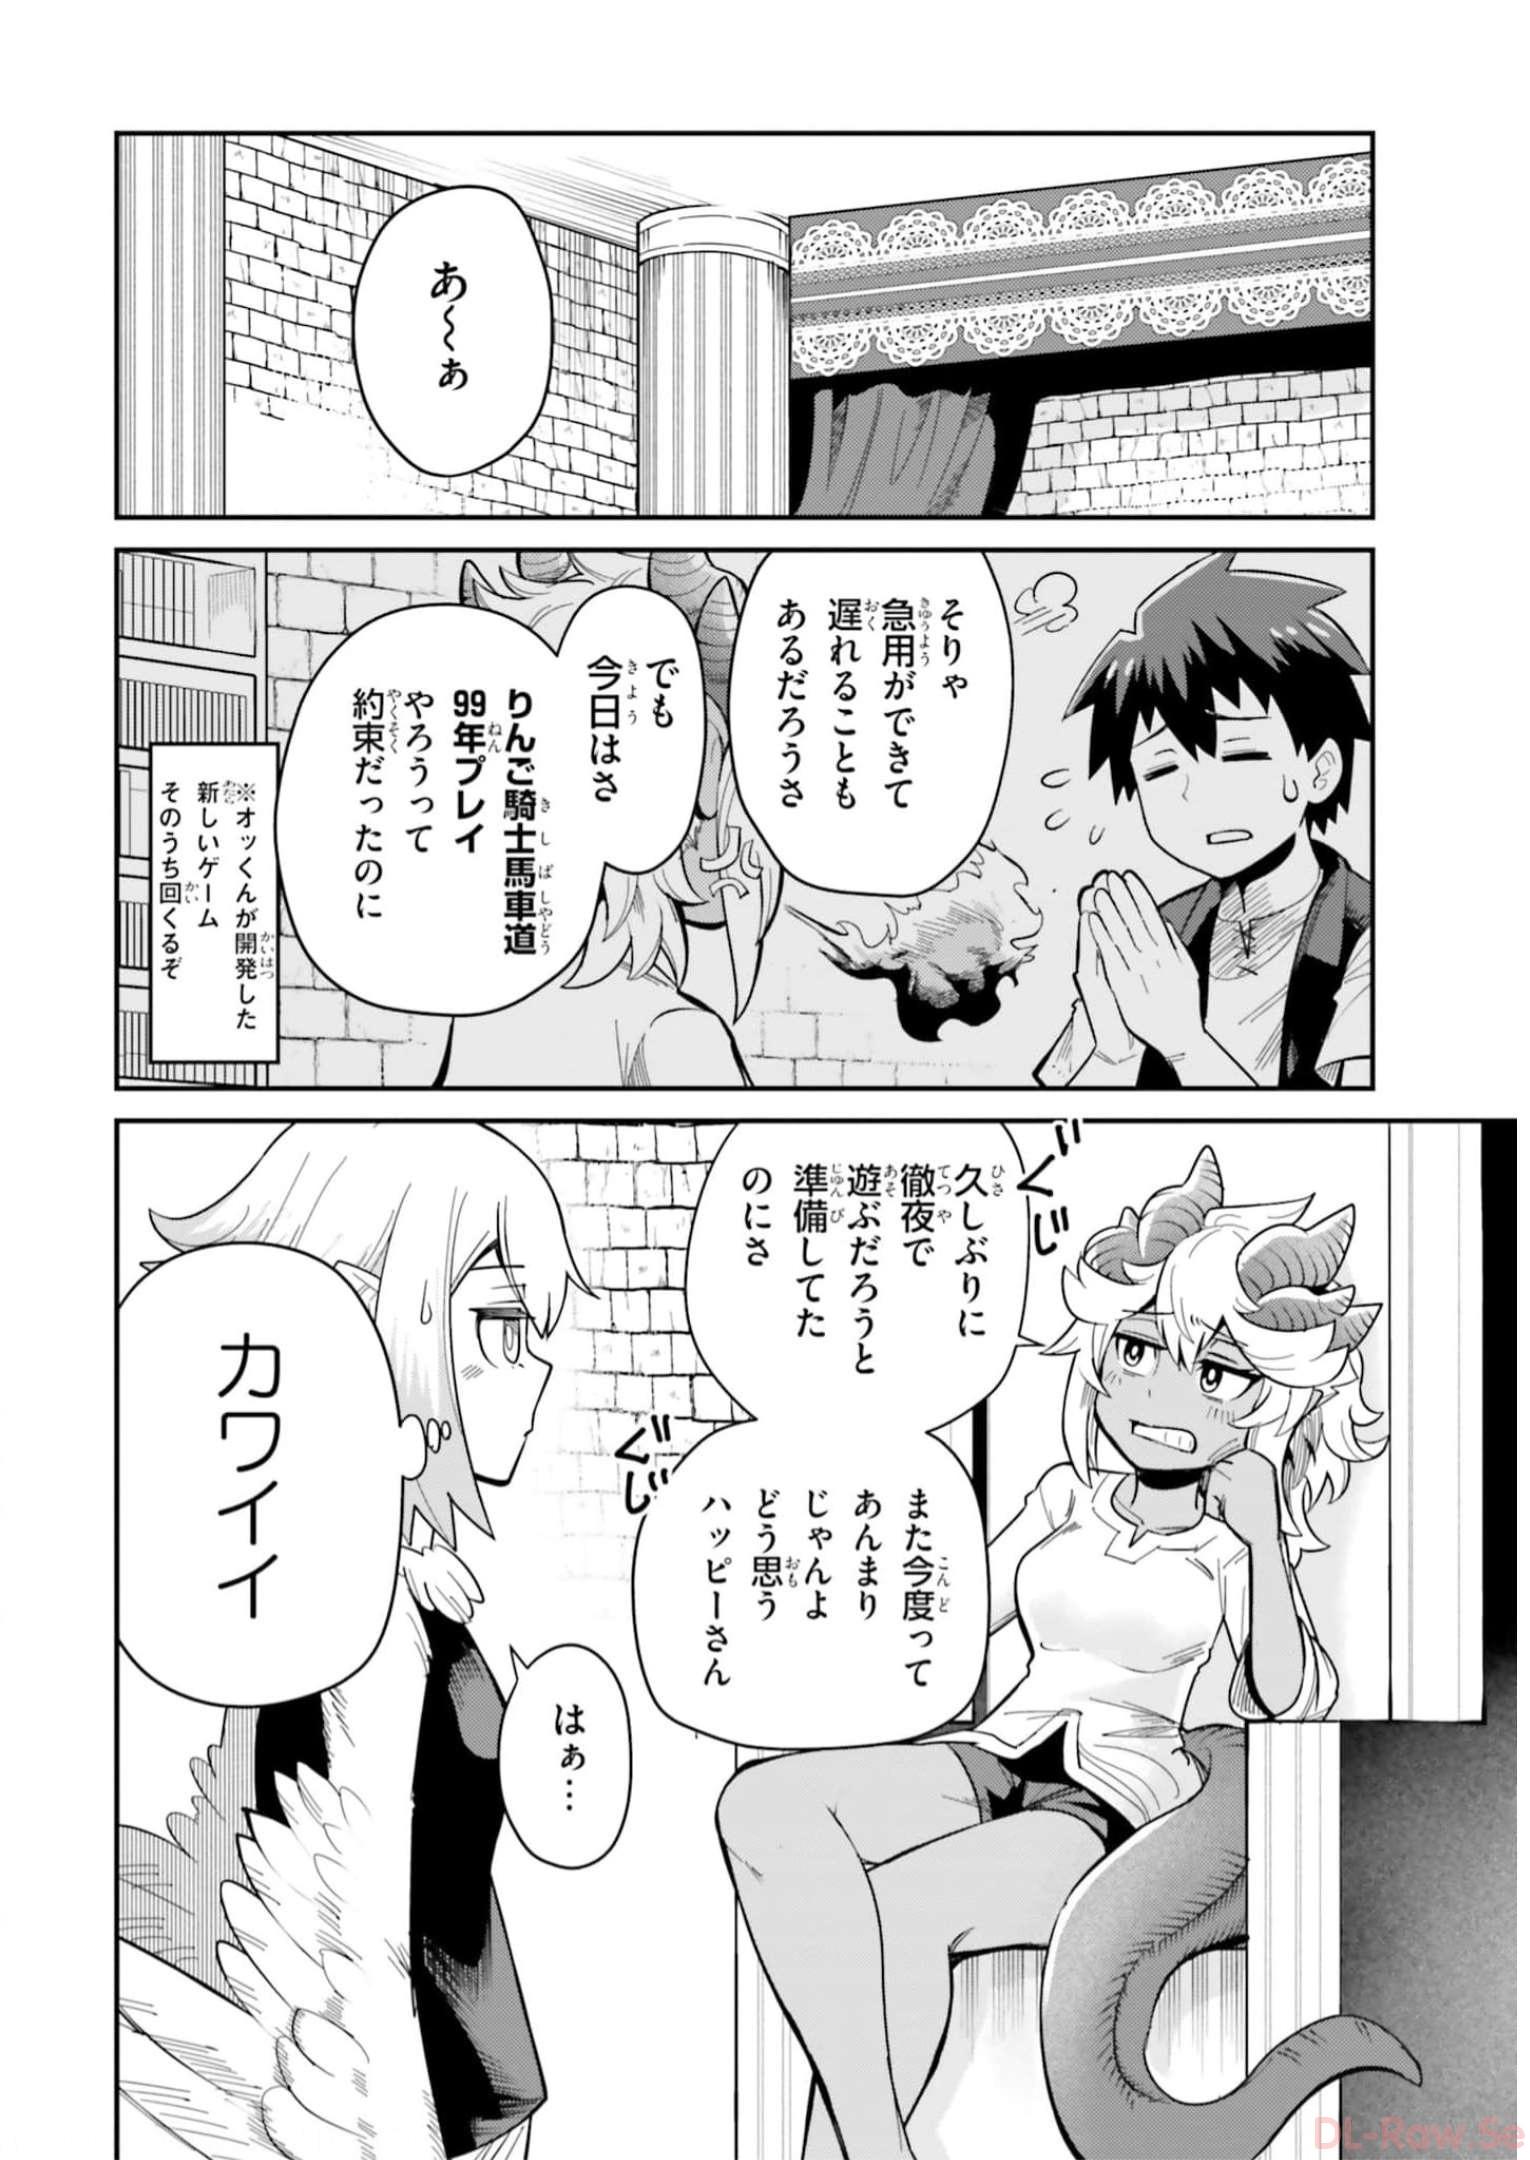 Dungeon Friends Forever Dungeon’s Childhood Friend ダンジョンの幼なじみ 第26話 - Page 2